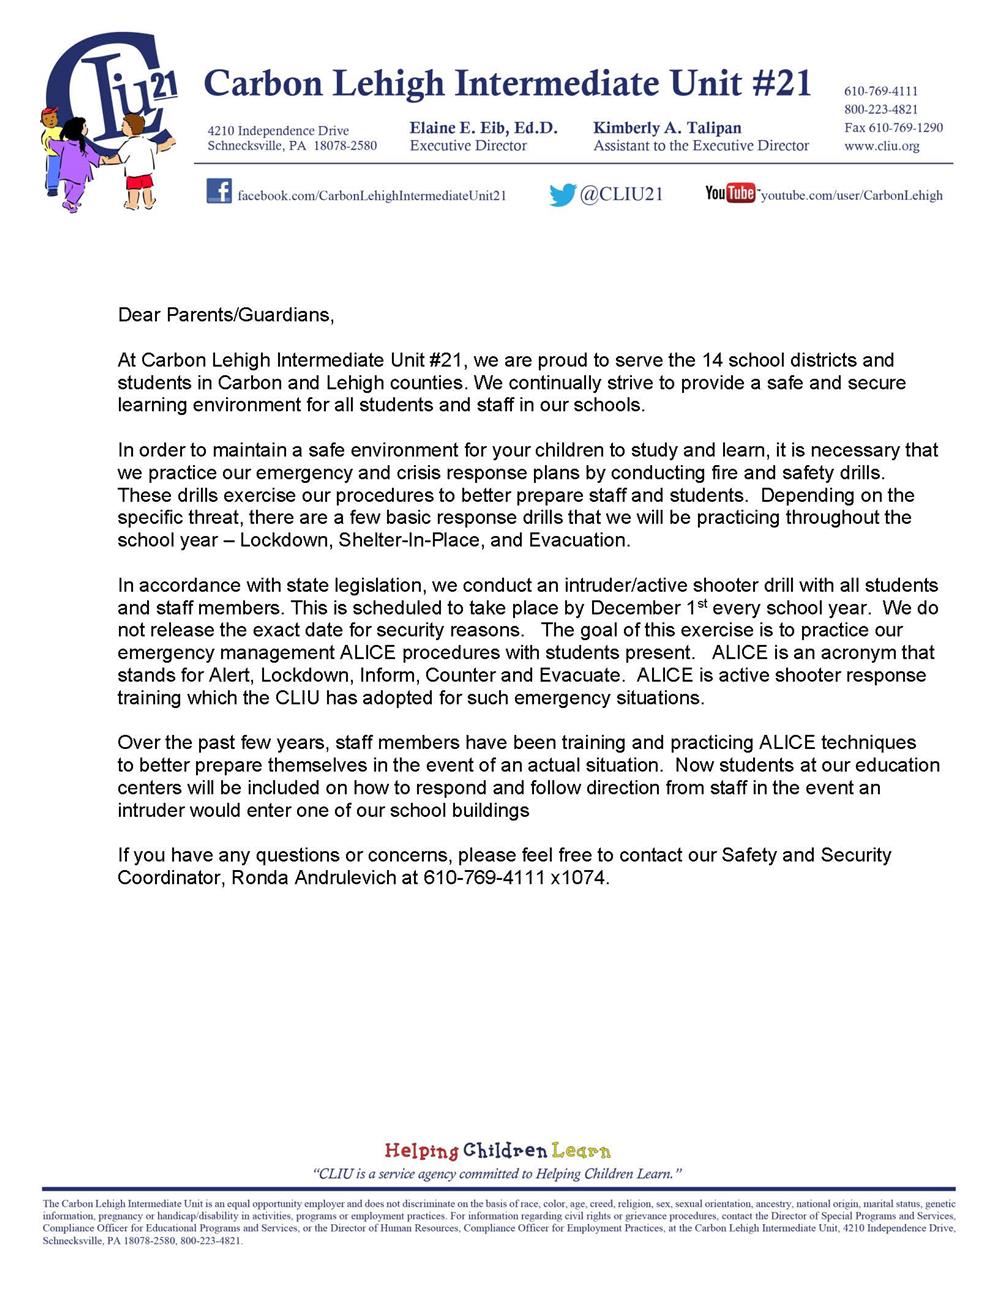 Letter to Parents and Guardians concerning school drills